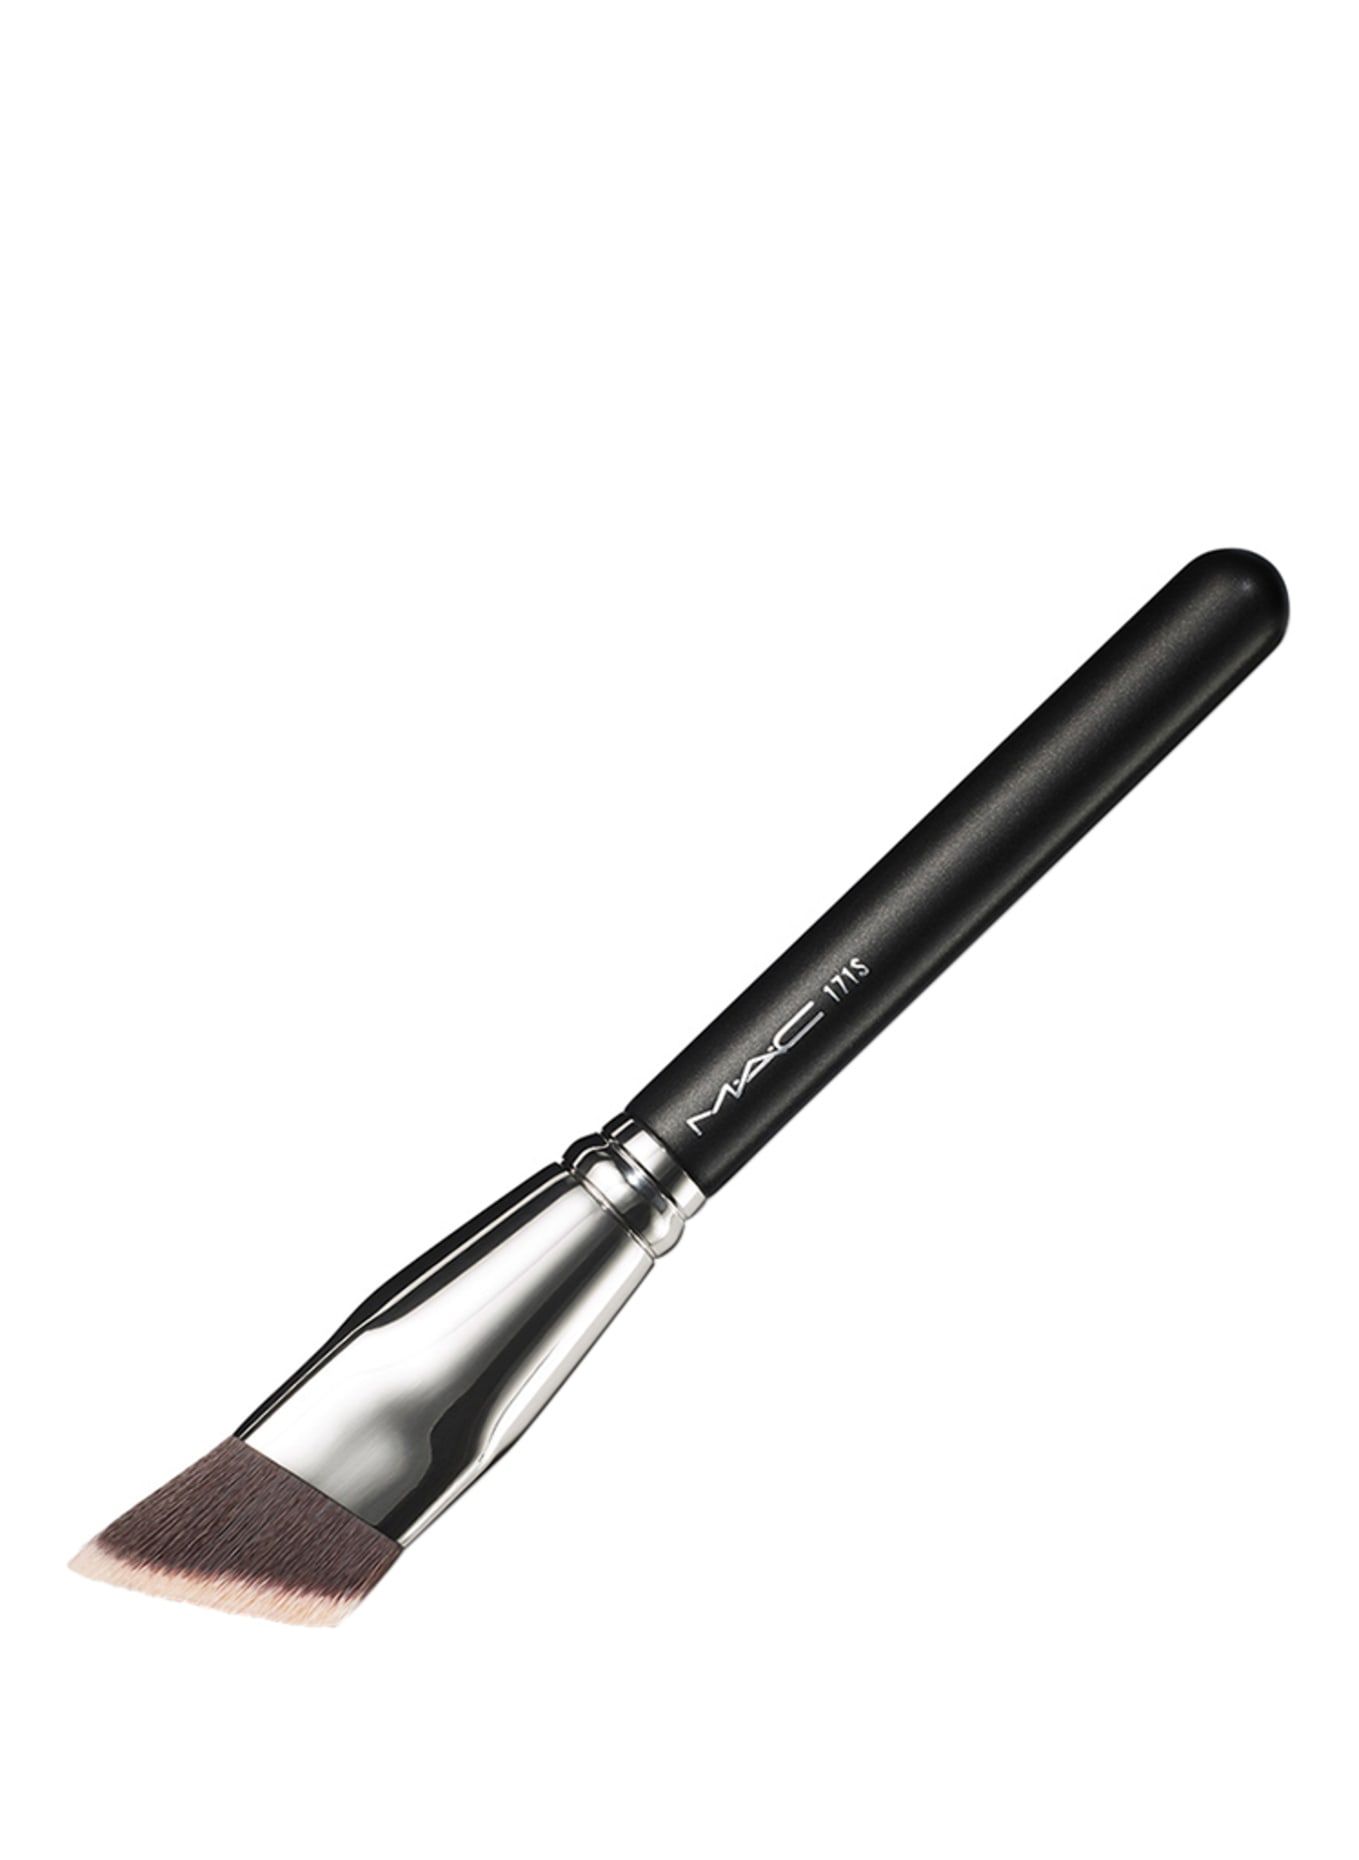 M.A.C SMOOTHE EDGE ALL OVER FACE BRUSH (Bild 4)